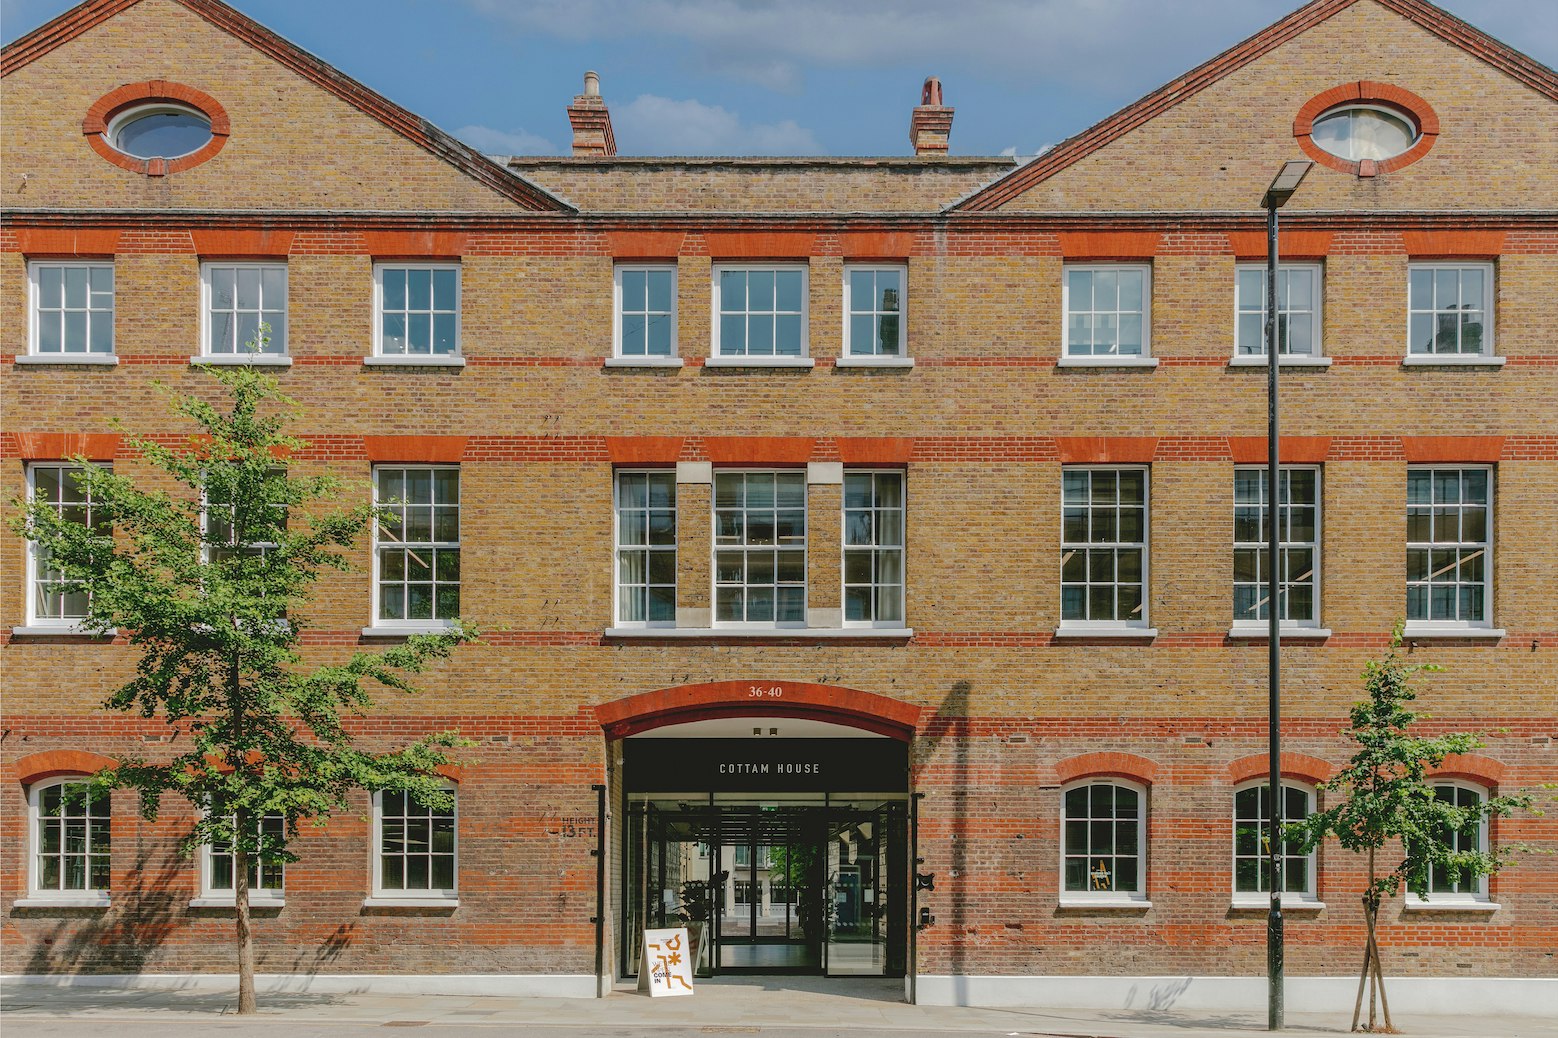 South London Venue Hire - The Mills Fabrica